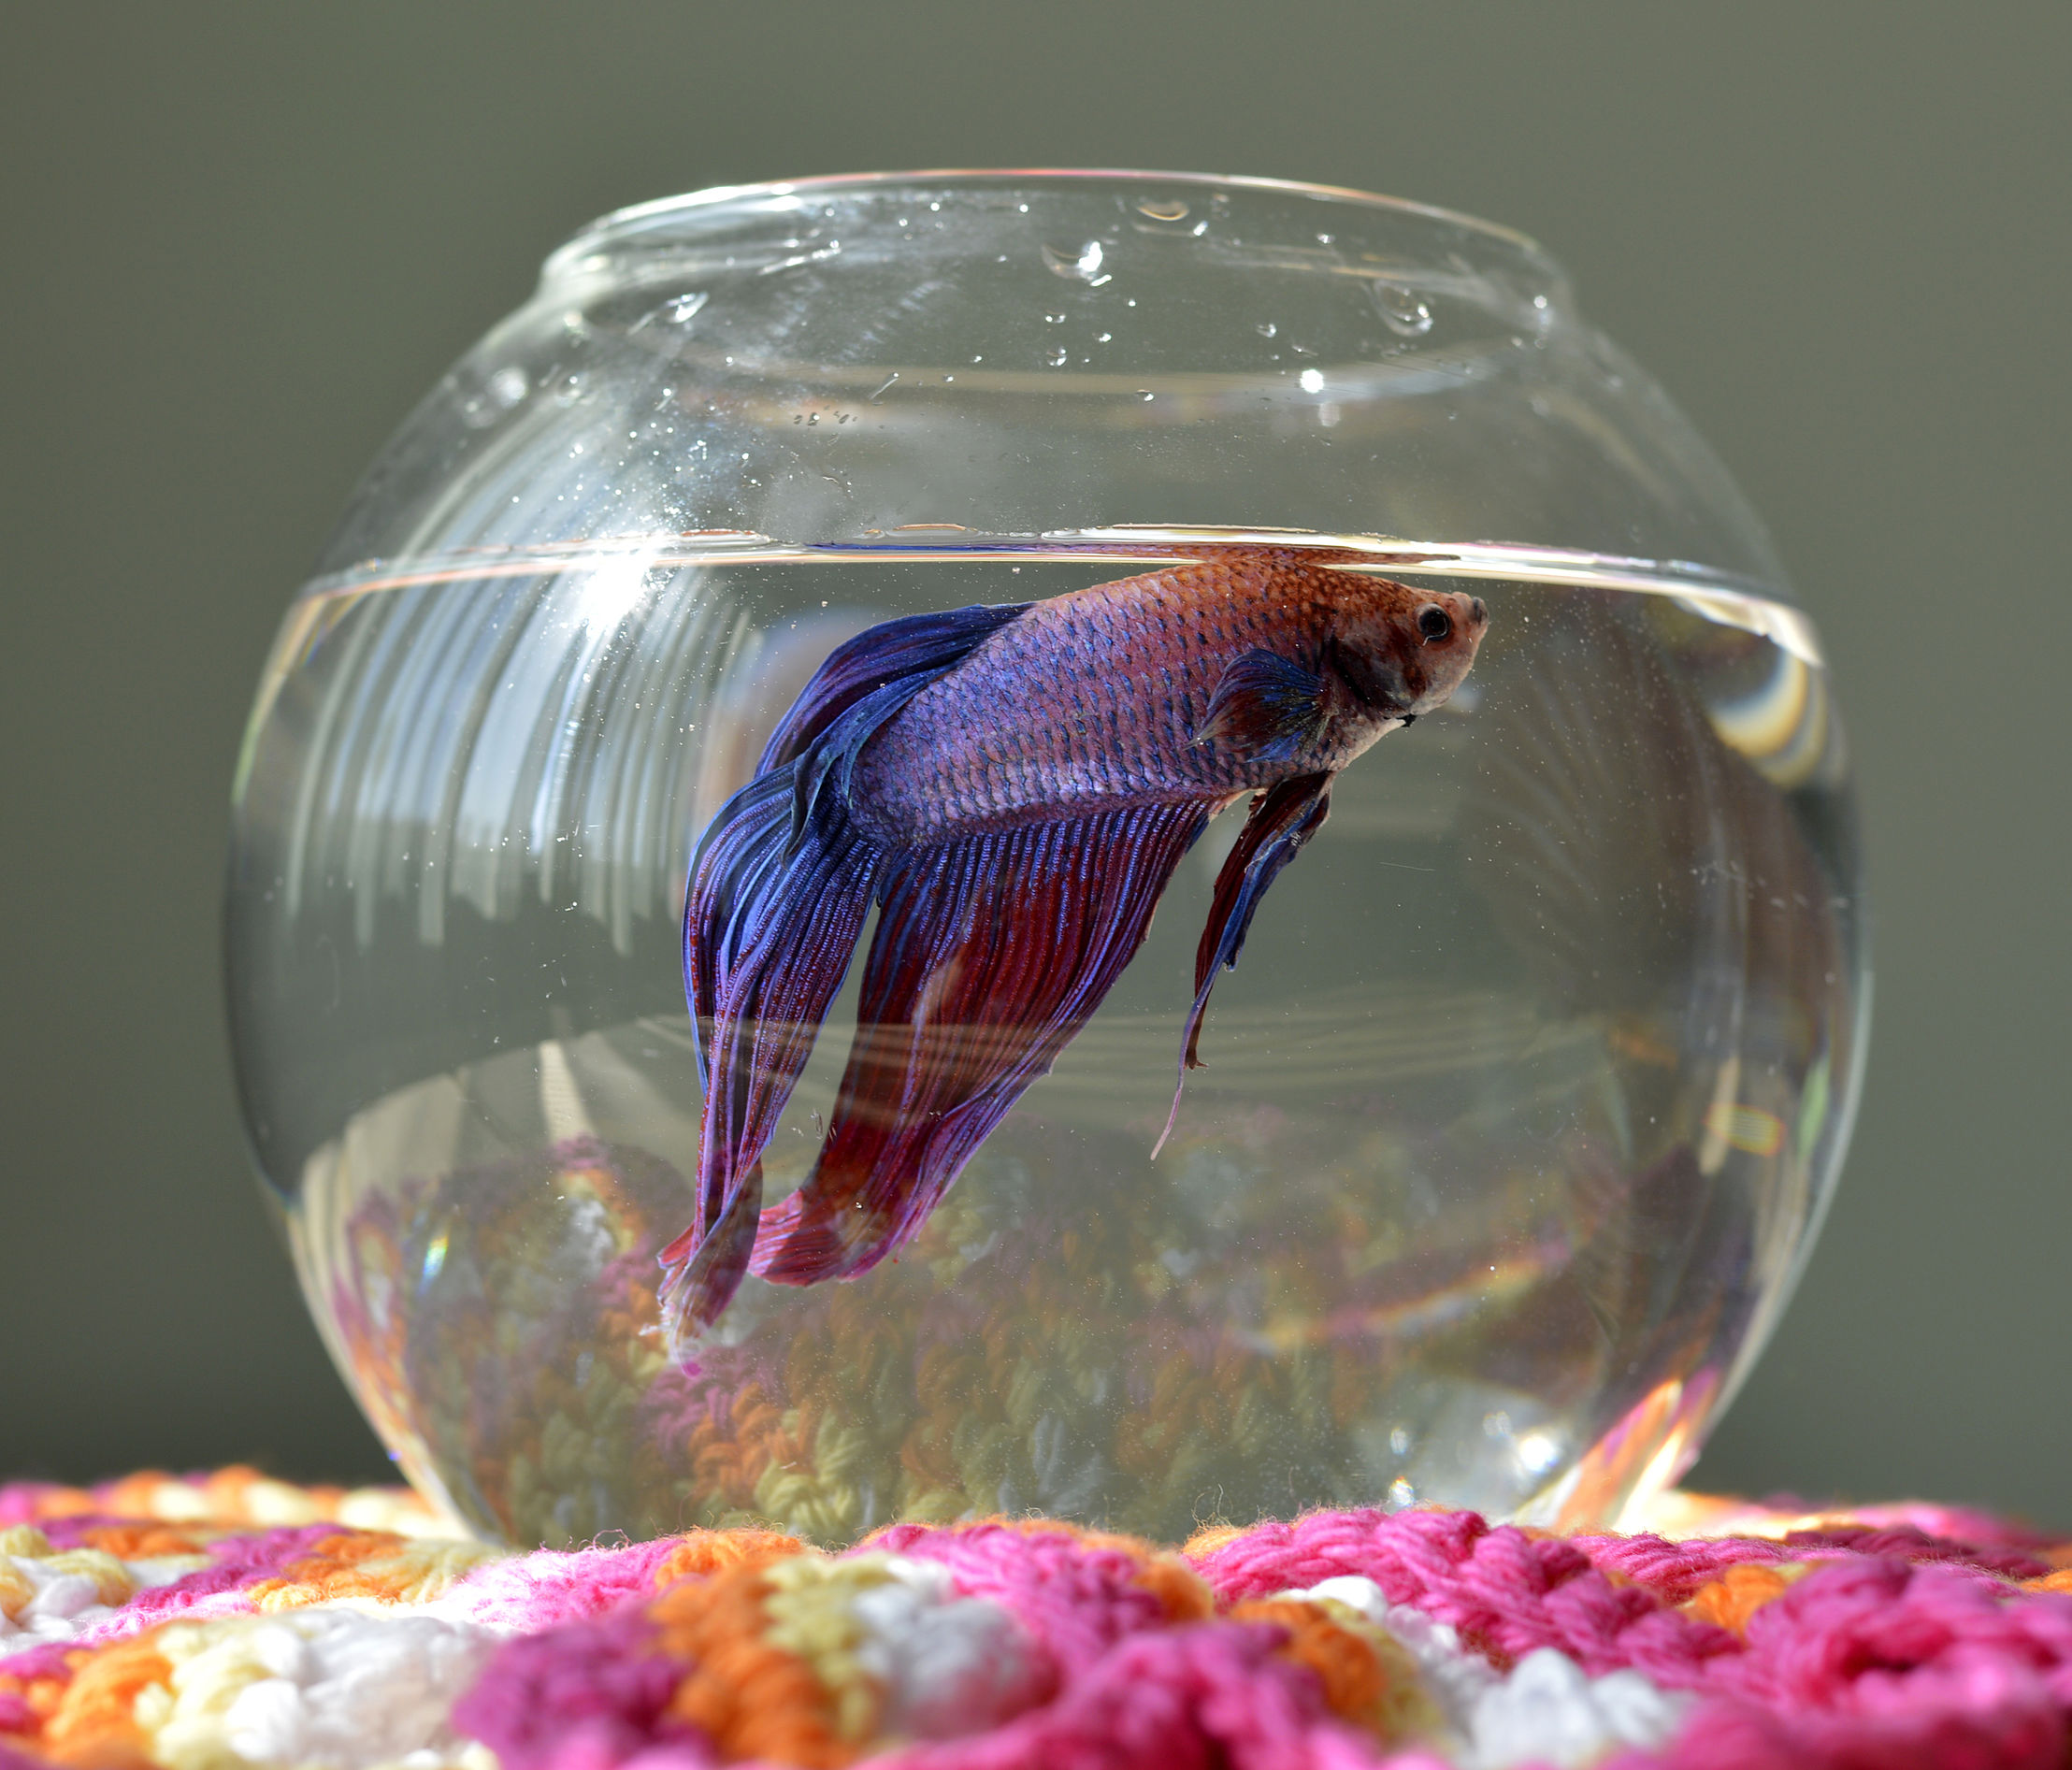 A vibrant Betta fish swimming in a well-maintained and suitably sized bowl